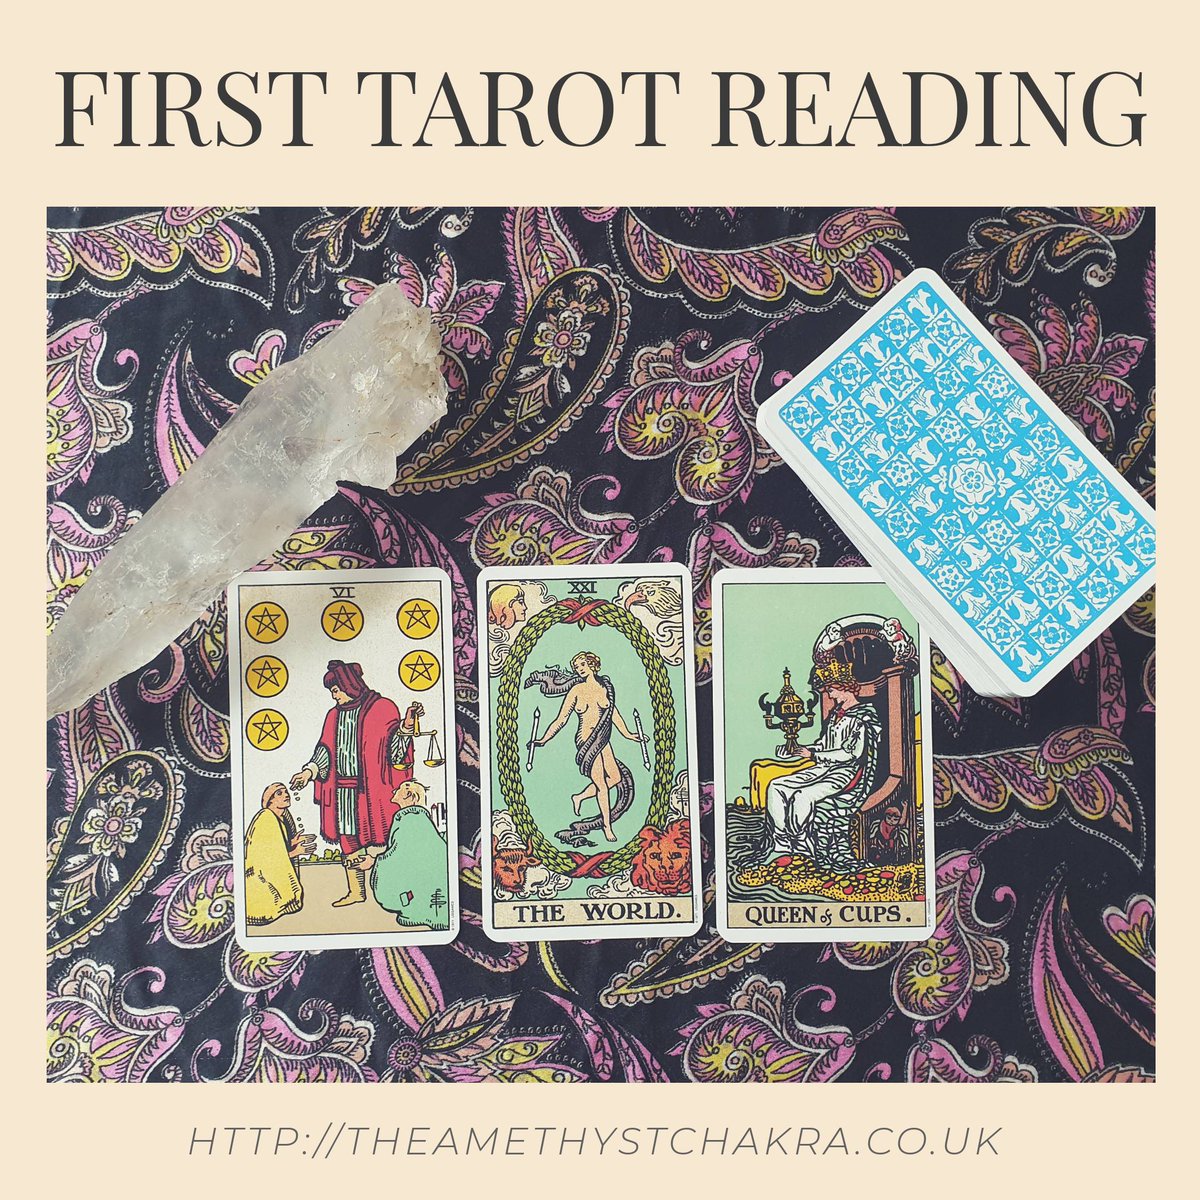 Finally have my newest blog post up about my first practice tarot reading.

#tarot #tarotreading #riderwaite #practicereading

ow.ly/Kou330oUF54